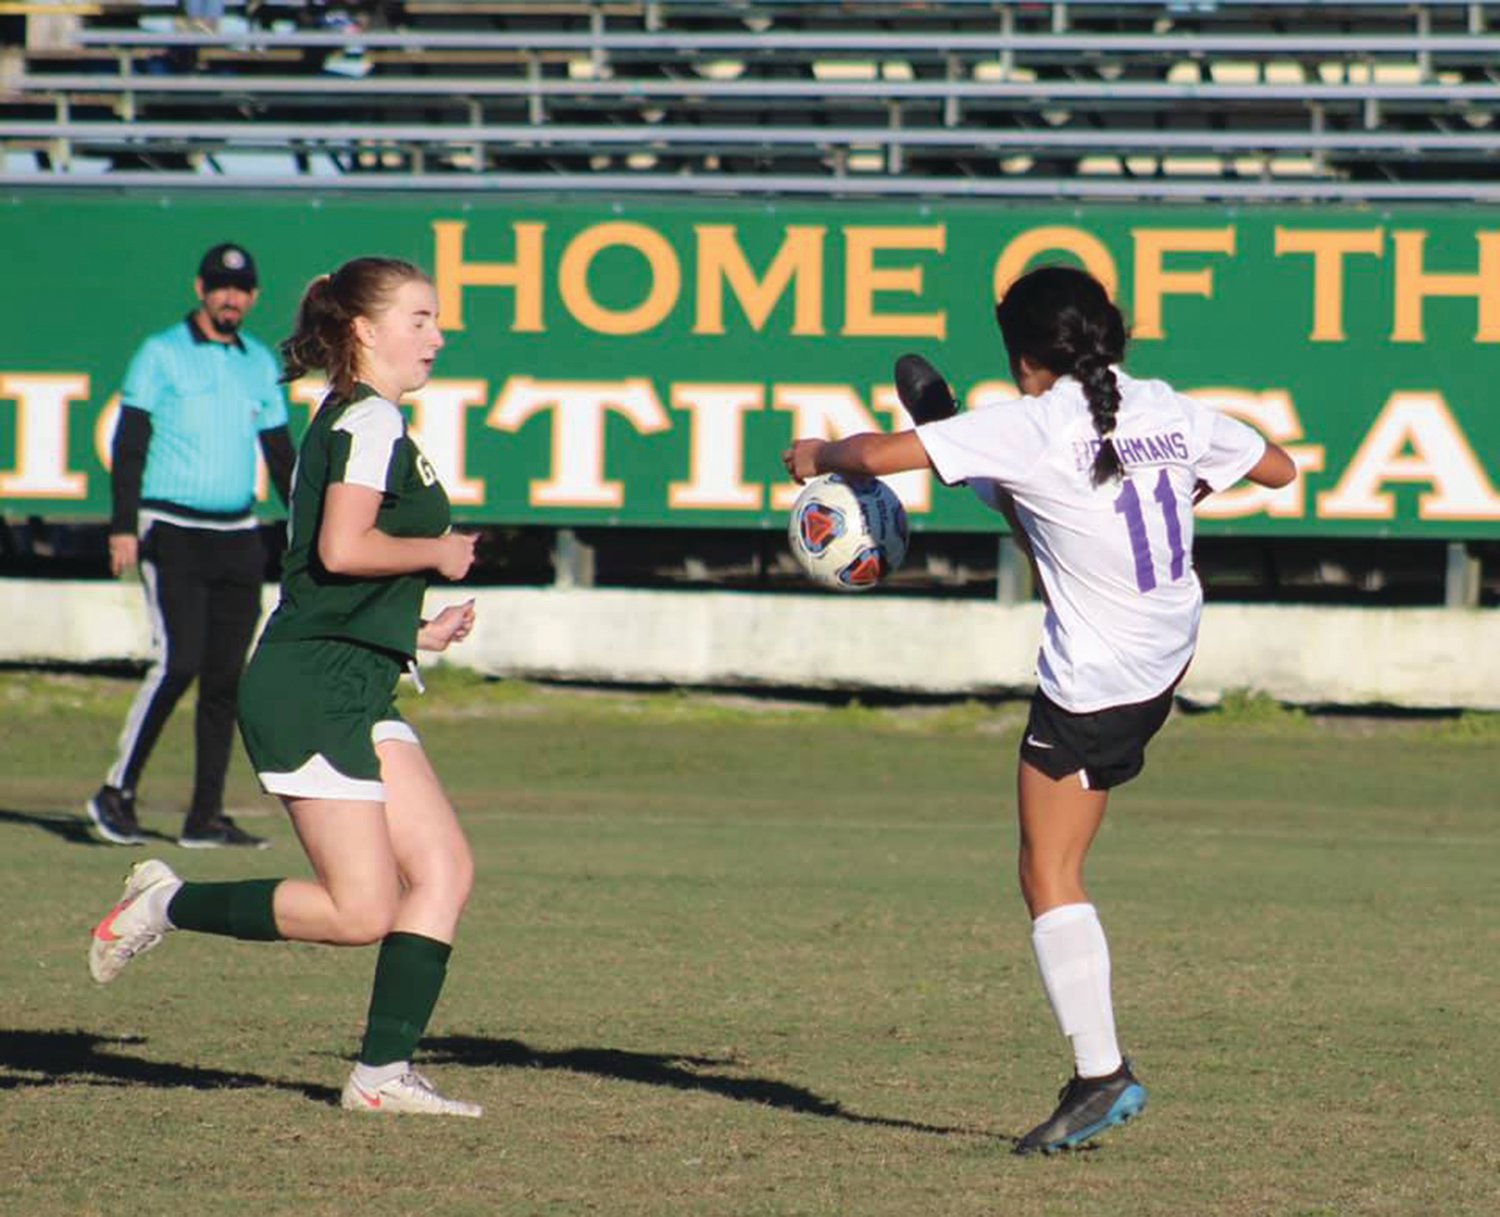 The Glades Day Lady Gators and Okeechobee Lady Brahmans will battle again on Jan. 19.